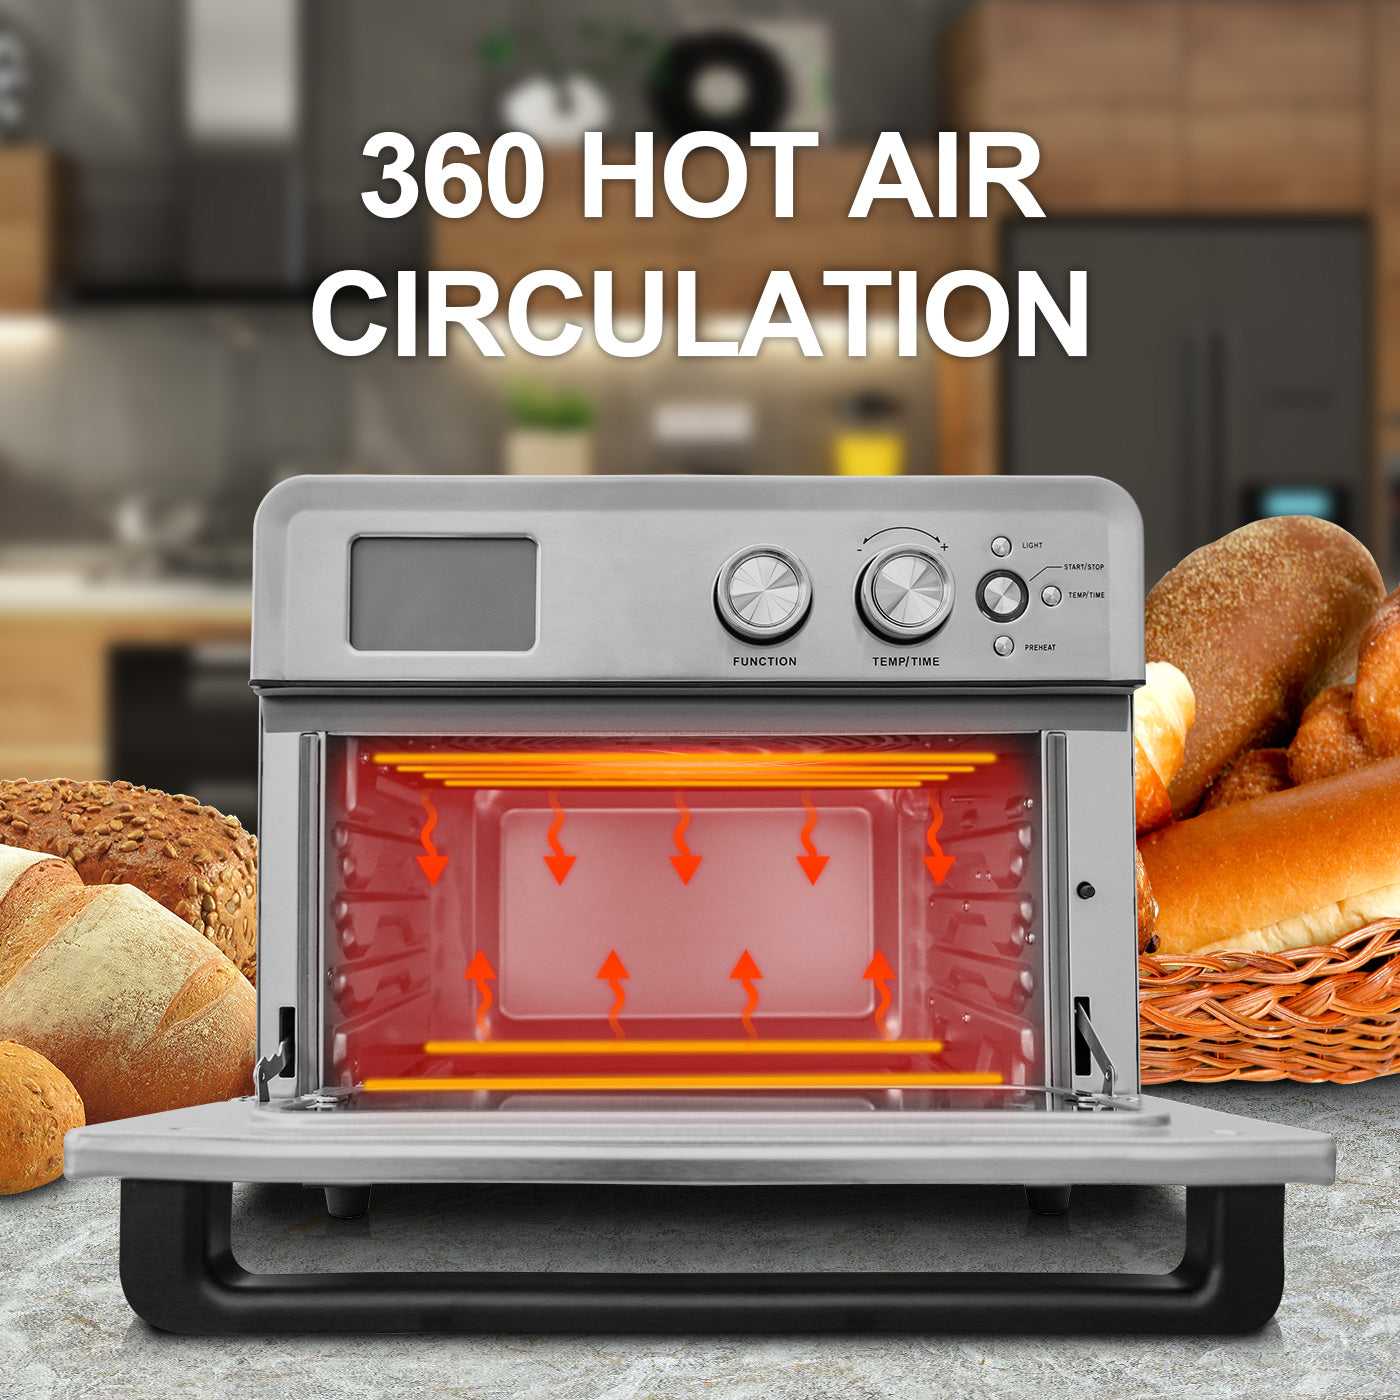 London Sunshine LCD Digital Display Air Fryer Convection Oven